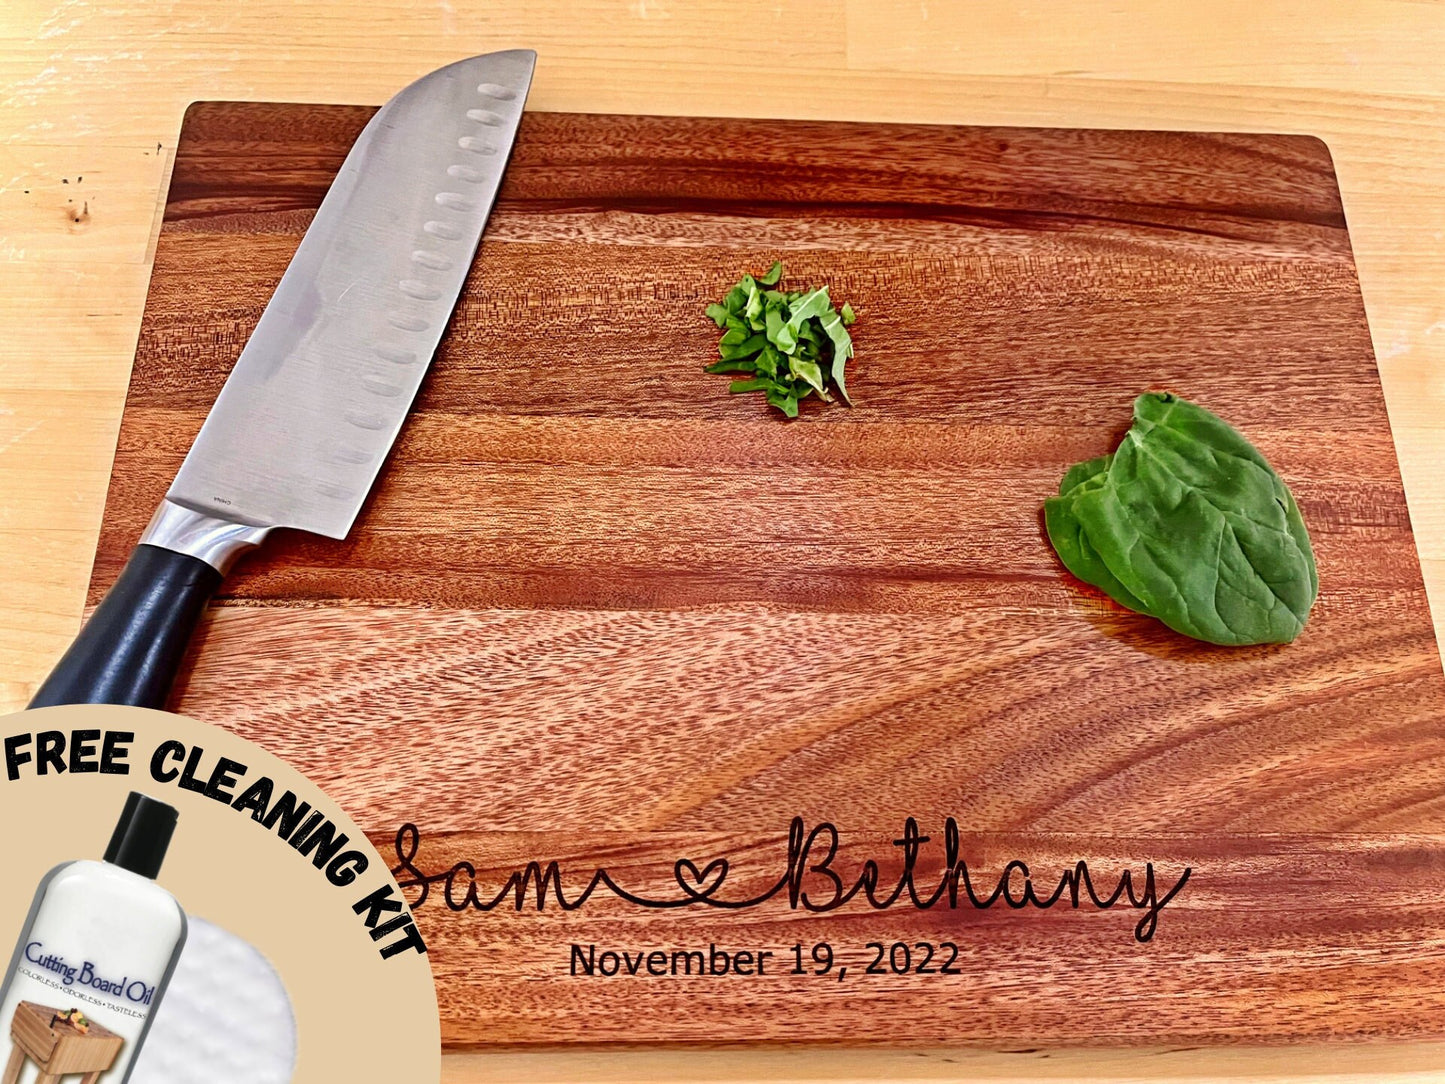 Personalized Kitchen Gift  Engraved Cooking Gift - Customized Cutting Board